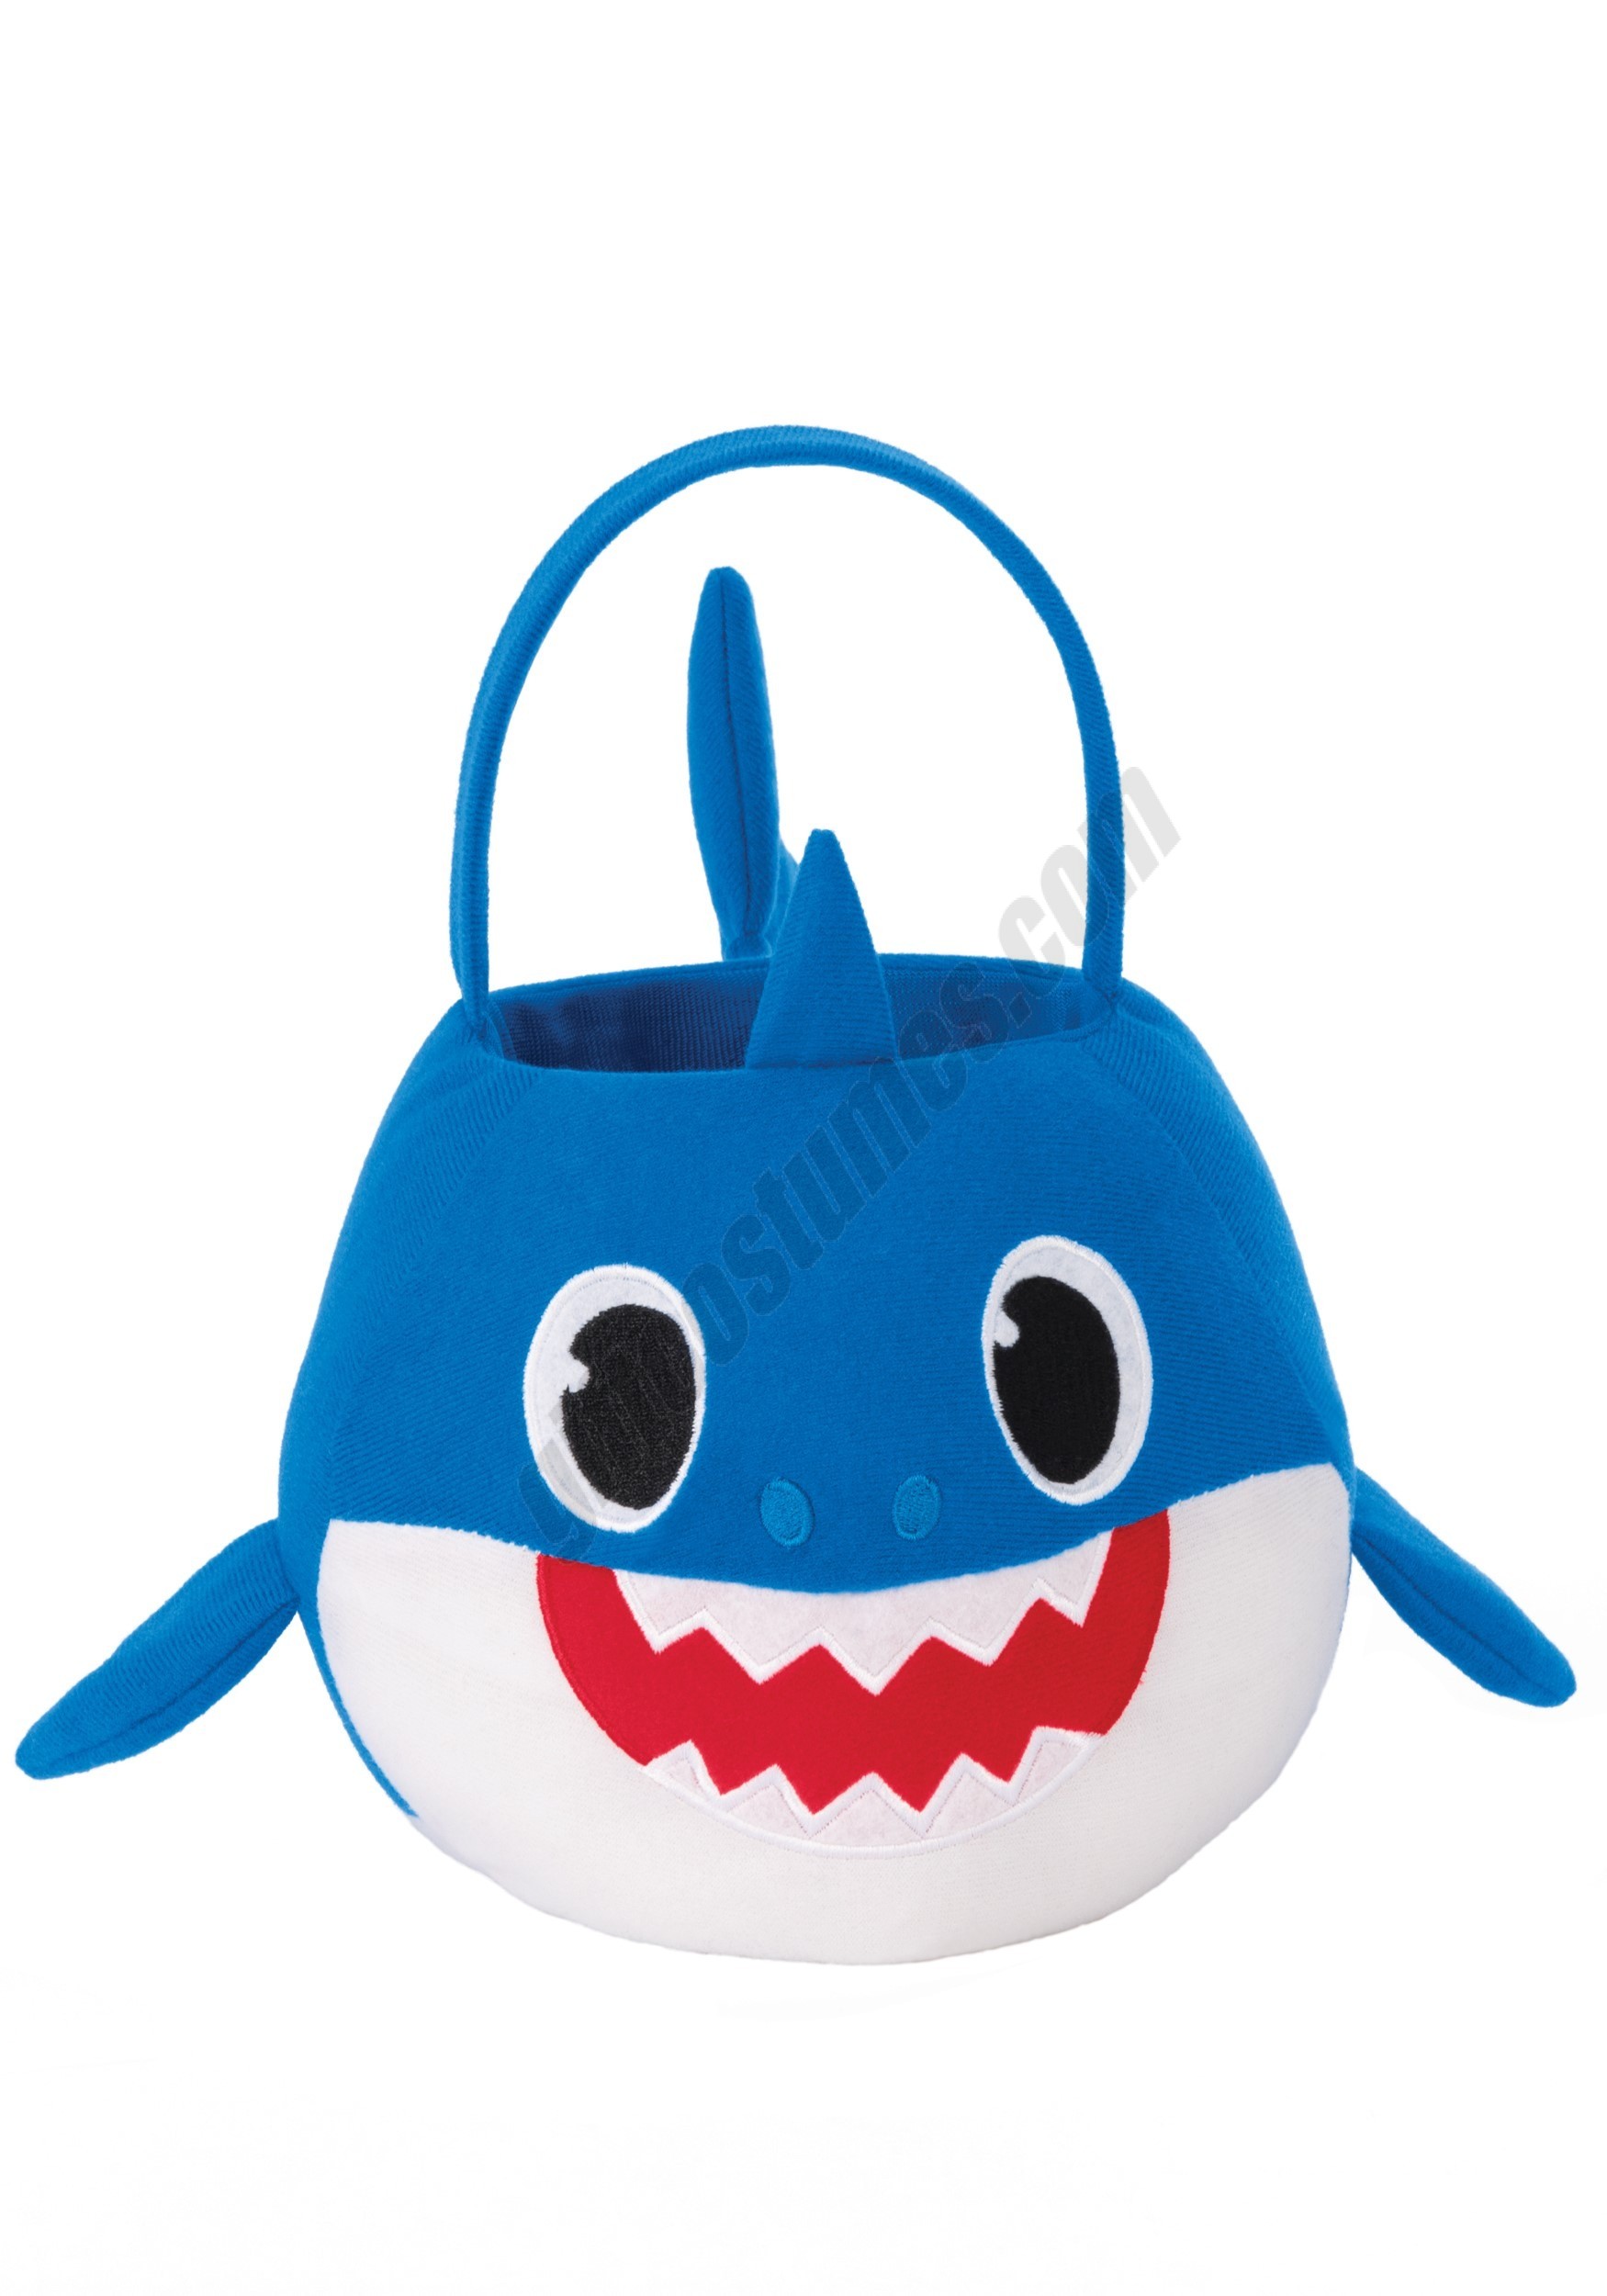 Daddy Shark Treat Tote with Soundchip Promotions - Daddy Shark Treat Tote with Soundchip Promotions